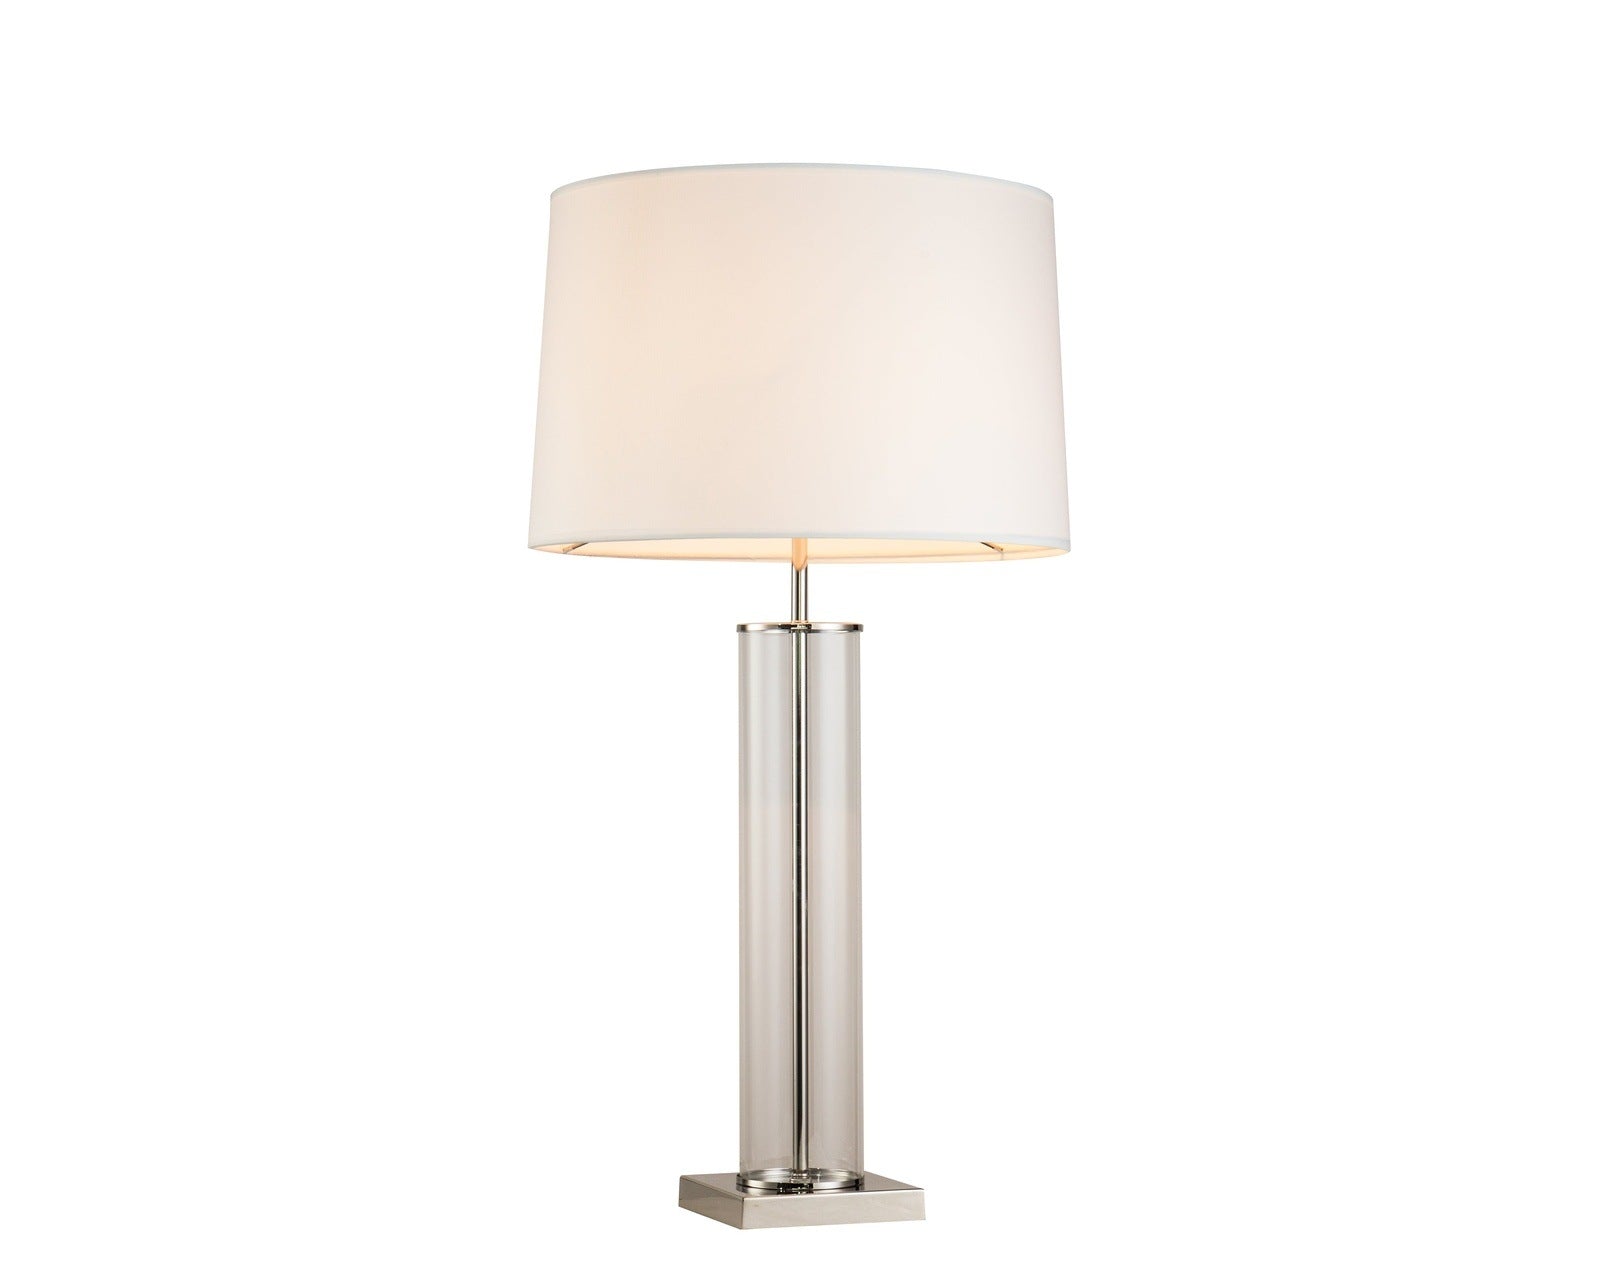 Liang Eimil Norman Table Lamp Nickel